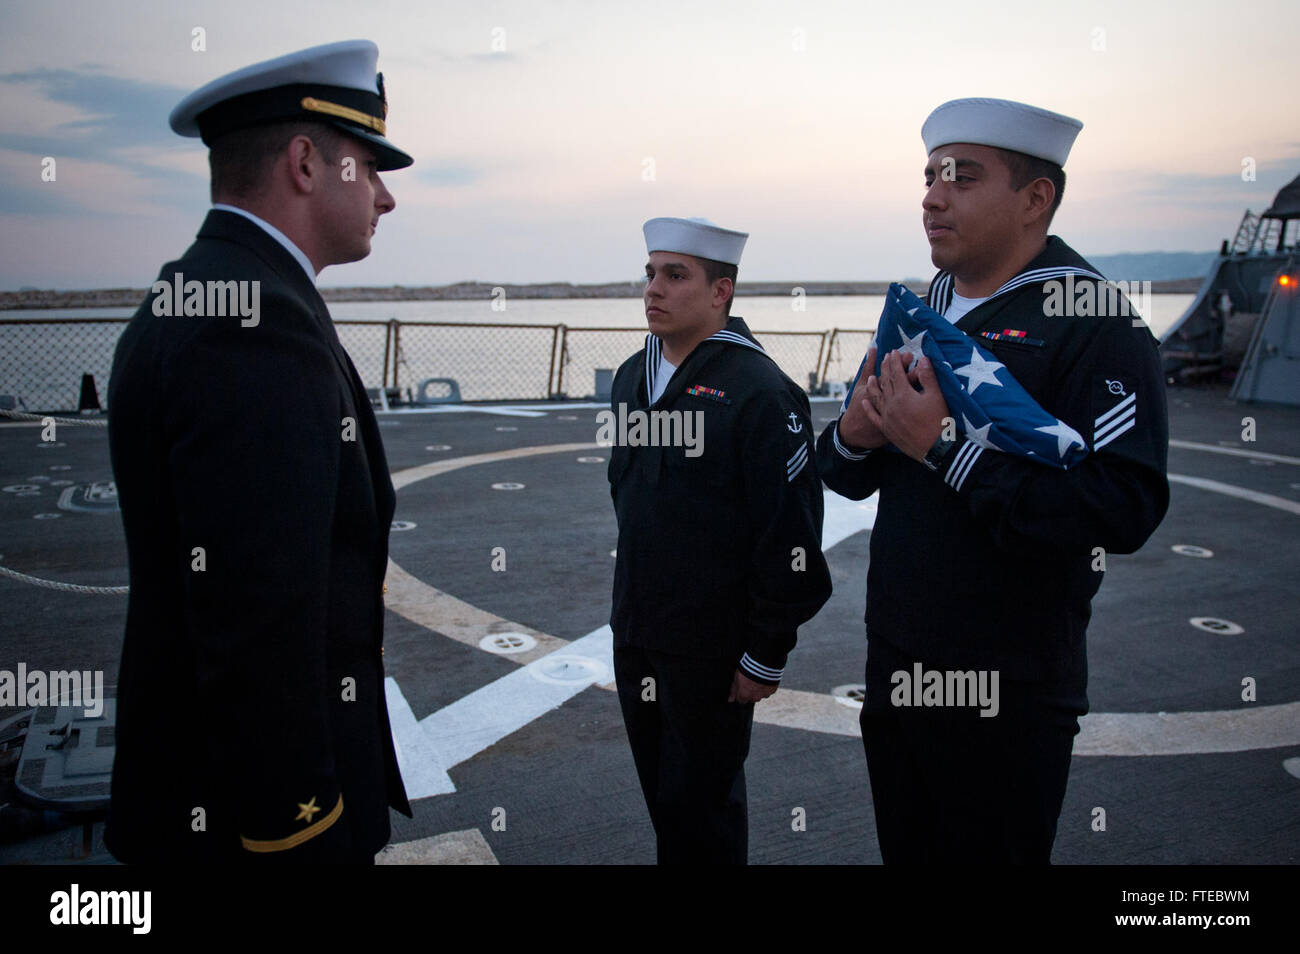 140312-N-WD757-068 MARSEILLE, France (March 12, 2014) – Operations Specialist Seaman Jose Garcia and Boatswain’s Mate Seaman Bryan Berrio prepare to turn over the national ensign after lowering the flag to Ensign Samuel Gasbarre during evening colors aboard the guided-missile destroyer USS Arleigh Burke (DDG 51) as the ship is in port on a scheduled visit to Marseille, France. Arleigh Burke is on a scheduled deployment in support of maritime security operations and theater security cooperation efforts in the U.S. 6th Fleet area of responsibility. (U.S. Navy photo by Mass Communication Speciali Stock Photo